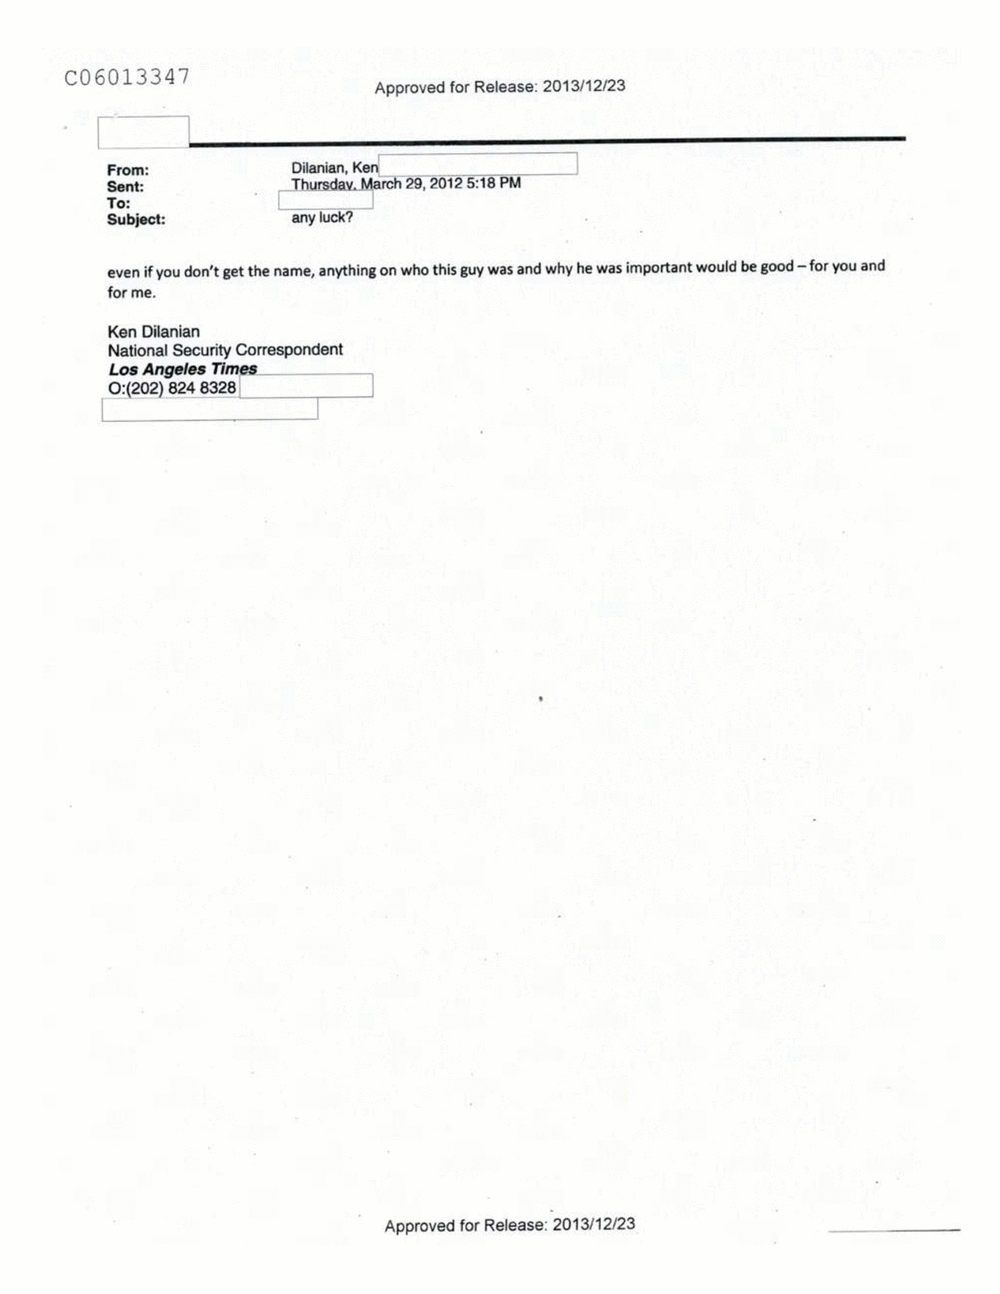 Page 257 from Email Correspondence Between Reporters and CIA Flacks